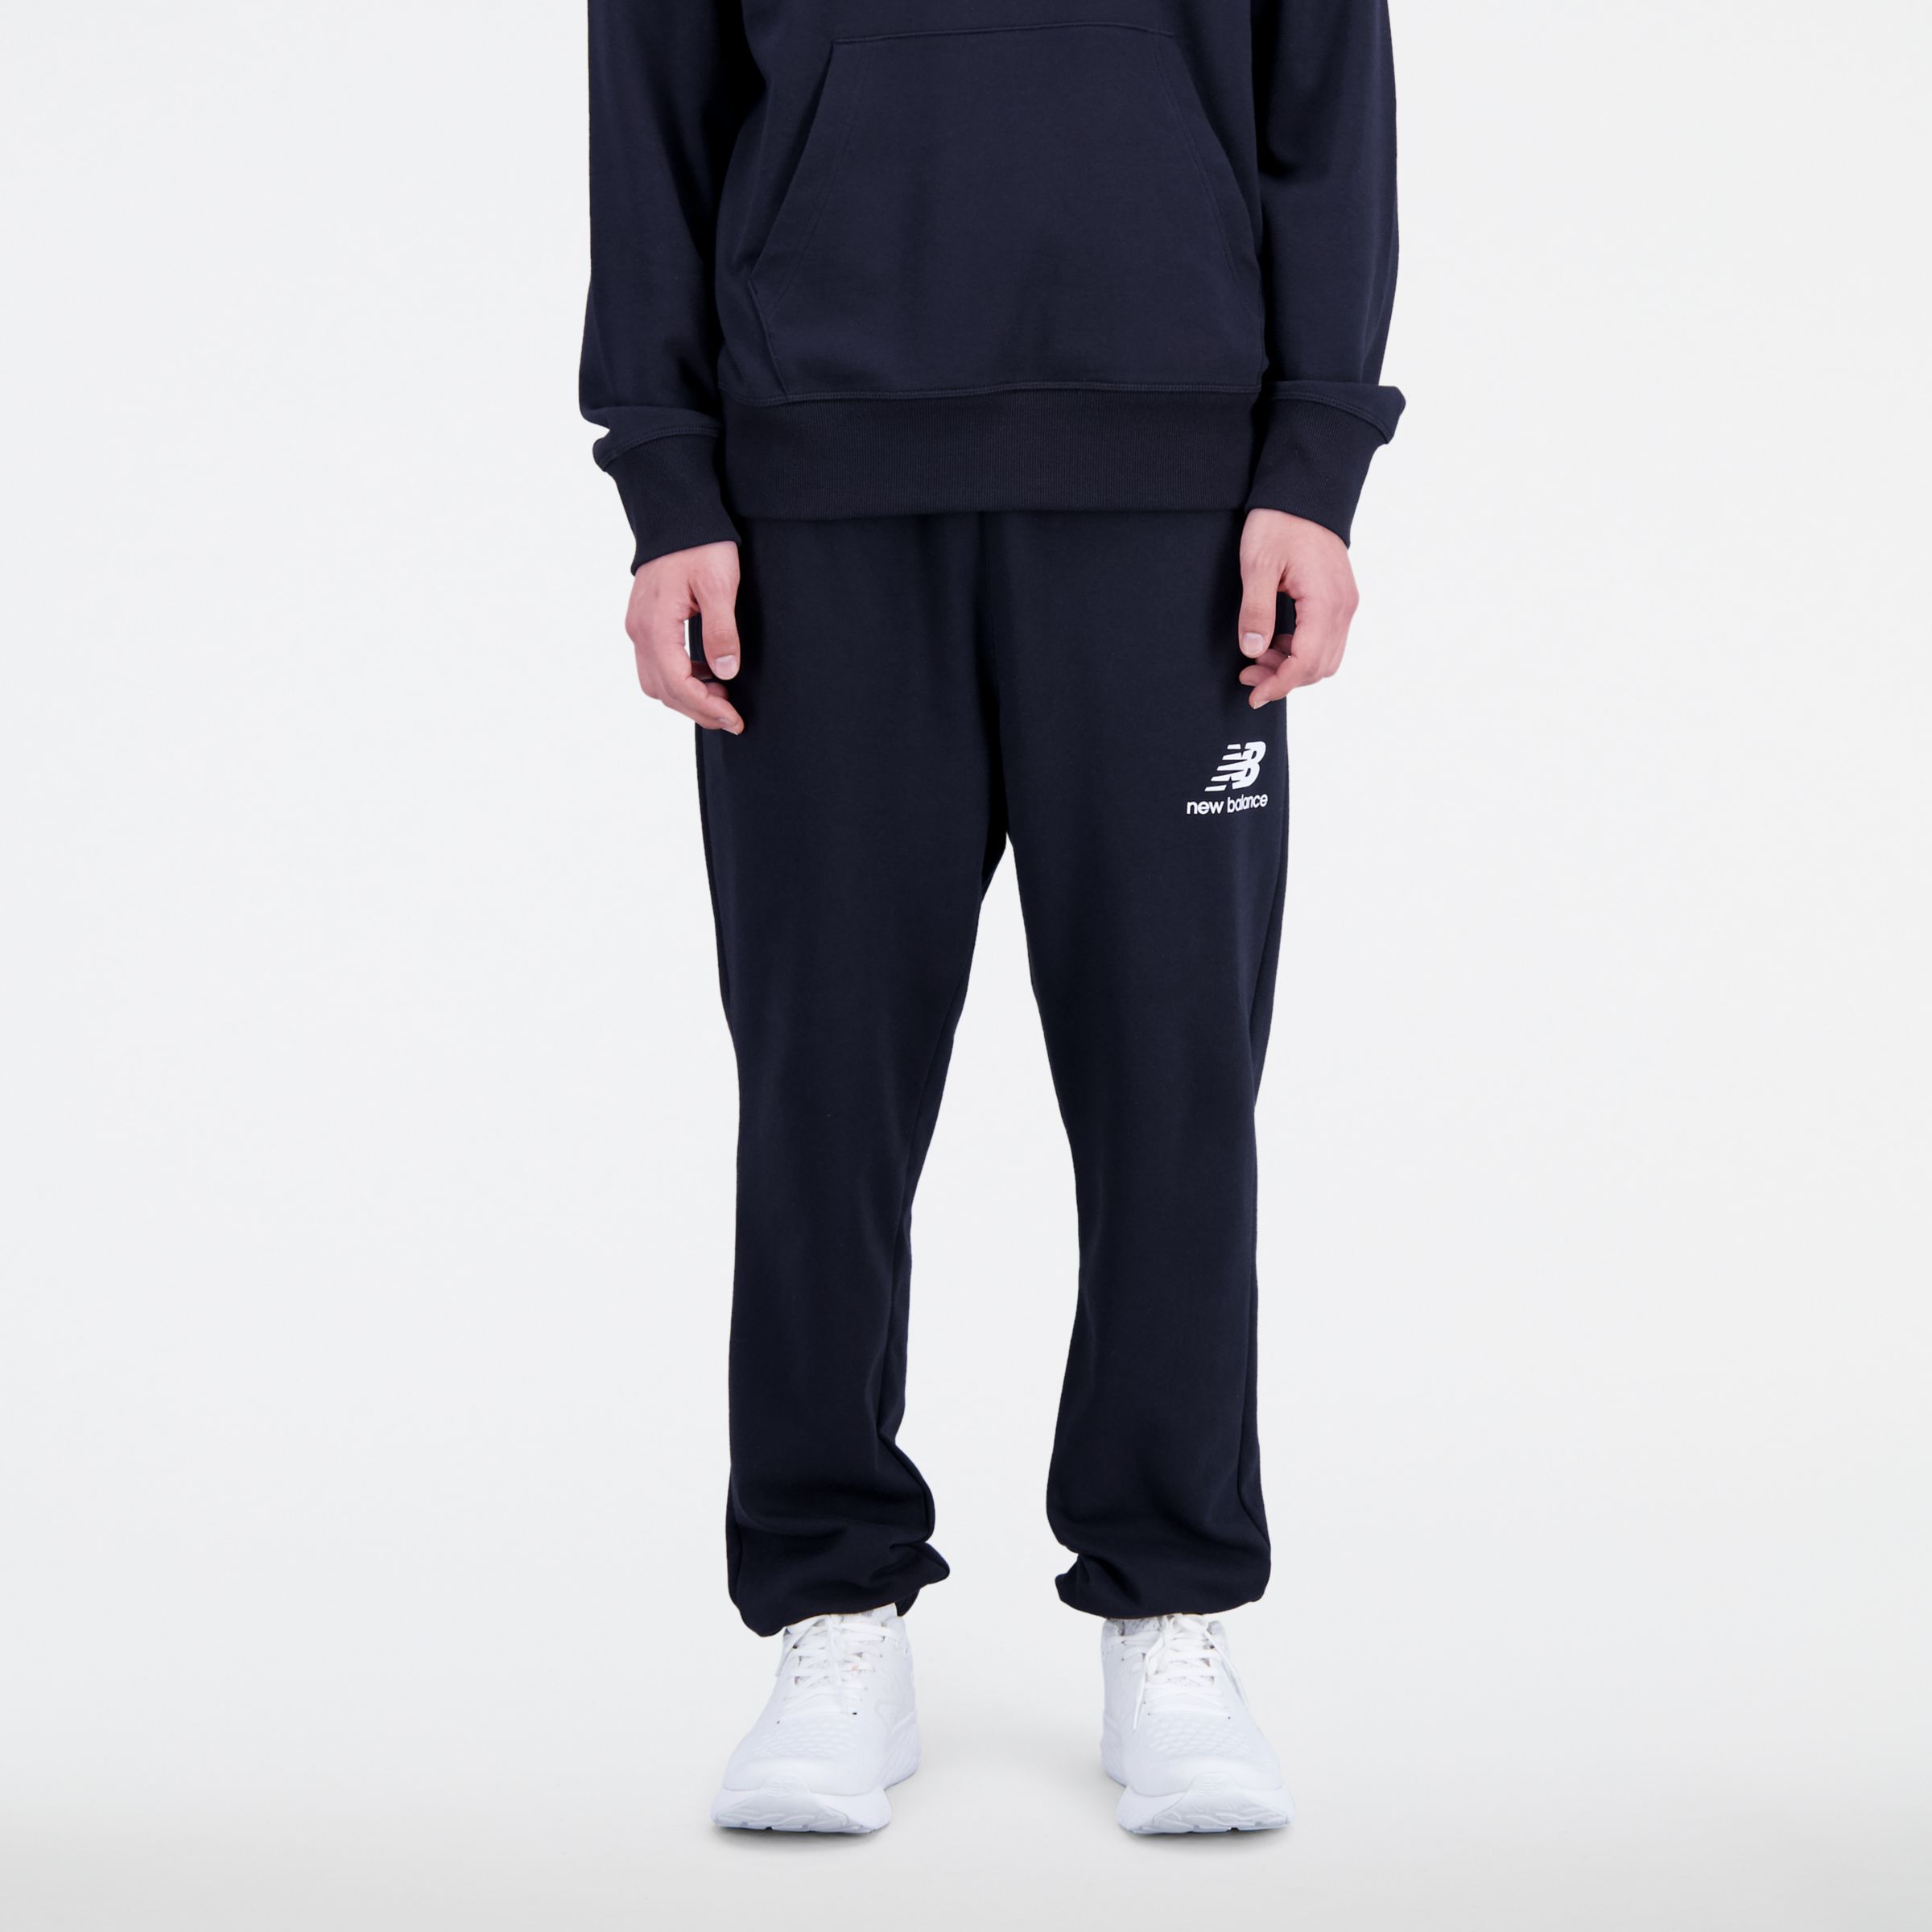 NB Essentials Reimagined French Terry Sweatpant, , swatch